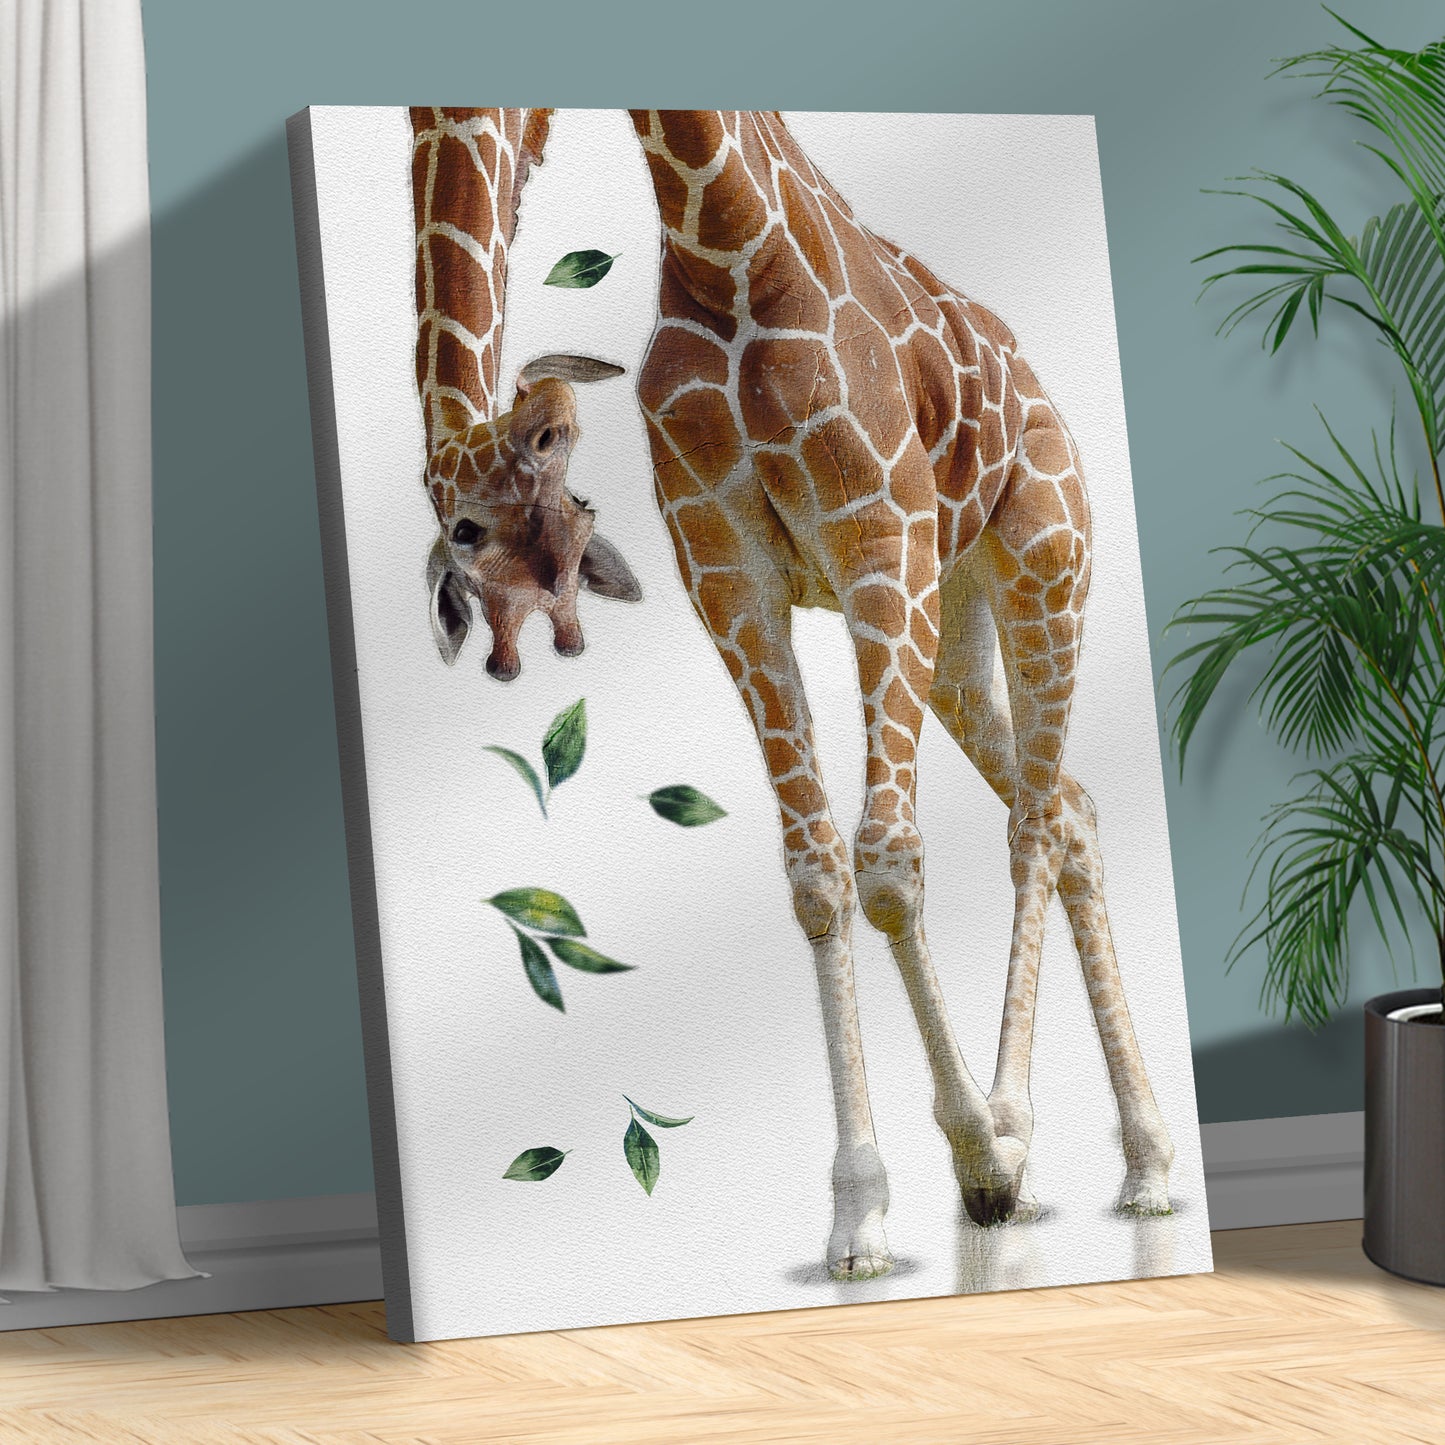 Upside Down Giraffe Head Portrait Canvas Wall Art Style 1 - Image by Tailored Canvases